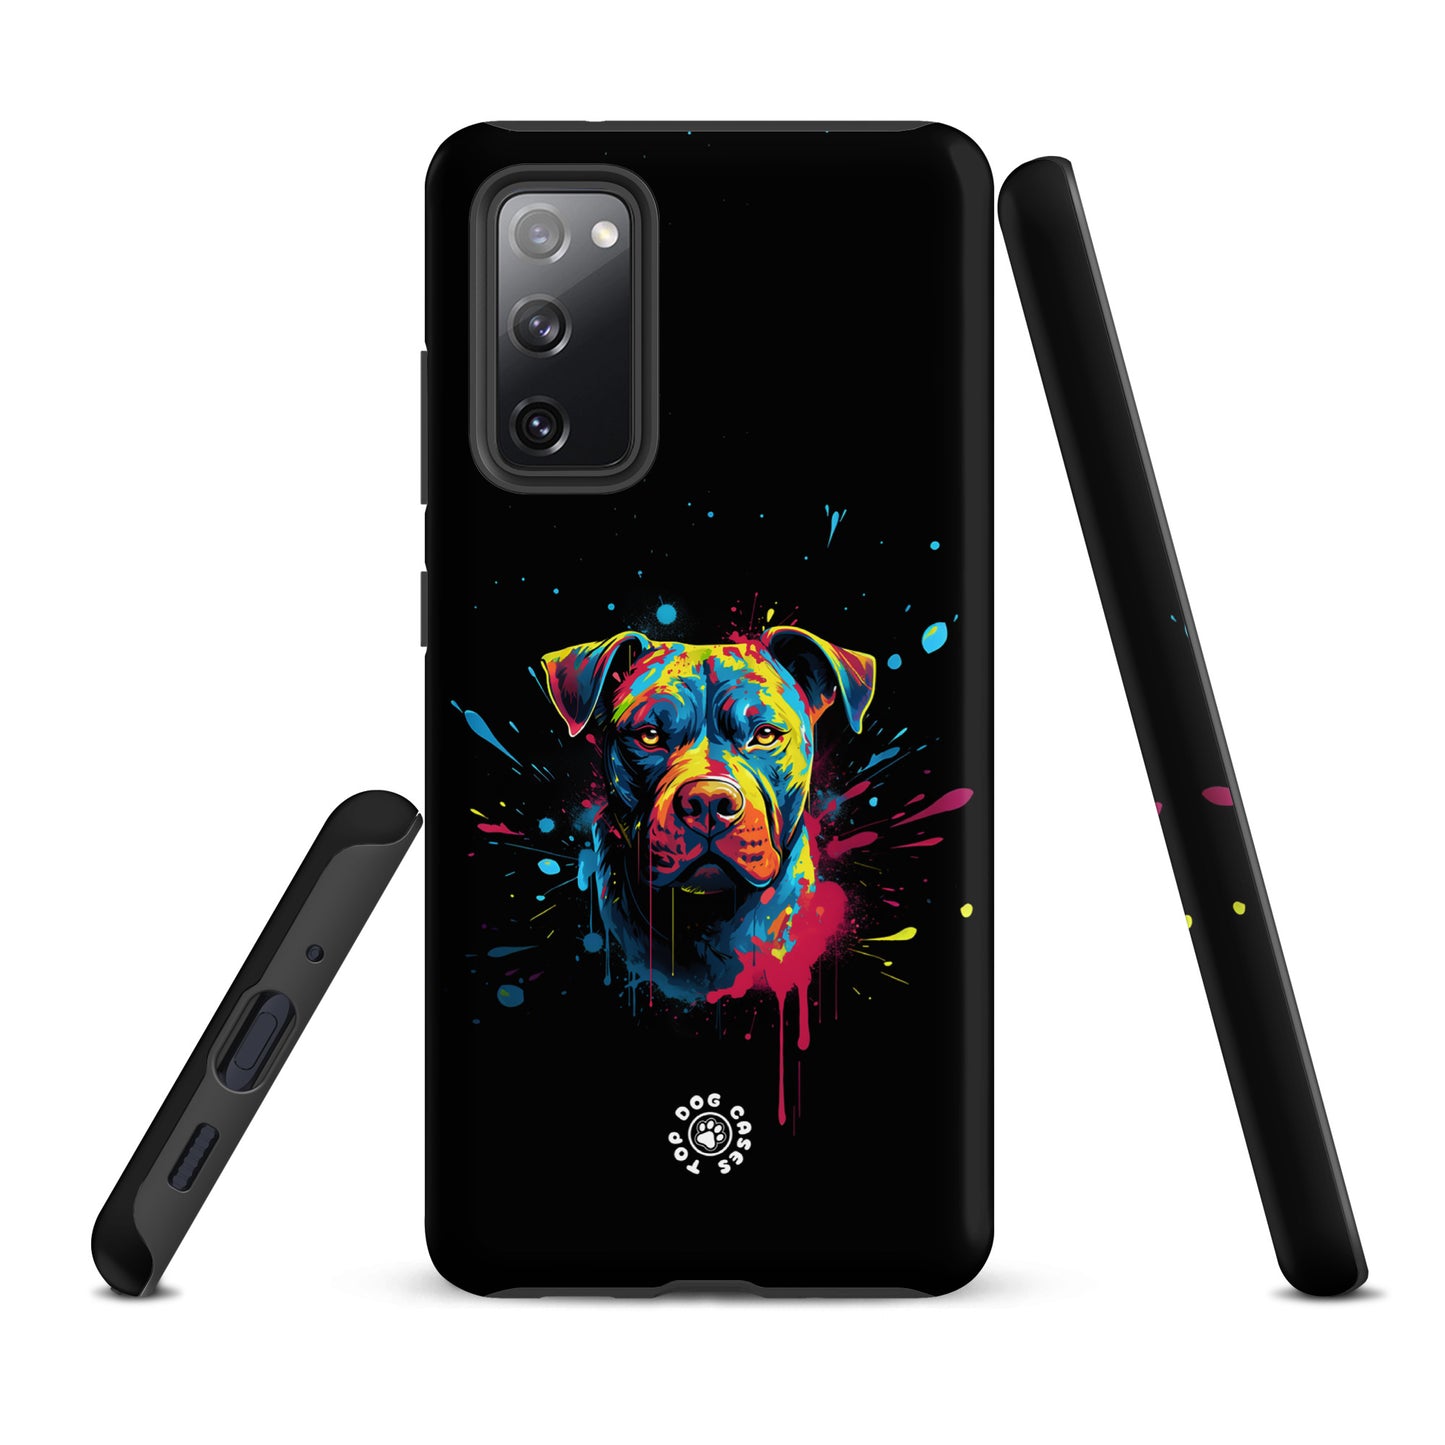 Pit Bull - Colorful Phone Case - Samsung - Top Dog Cases - #ColorfulPhoneCases, #DogPhoneCase, #Pit Bull, #Samsung, #SamsungGalaxy, #SamsungGalaxyCase, #SamsungGalaxyS10, #SamsungGalaxyS20, #SamsungGalaxyS21, #SamsungGalaxyS22, #SamsungGalaxyS22Ultra, #SamsungGalaxyS23, #SamsungGalaxyS23Plus, #SamsungGalaxyS23Ultra, #SamsungPhoneCase, #ToughCase, SamsungGalaxyS20Plus, SamsungGalaxyS22Plus